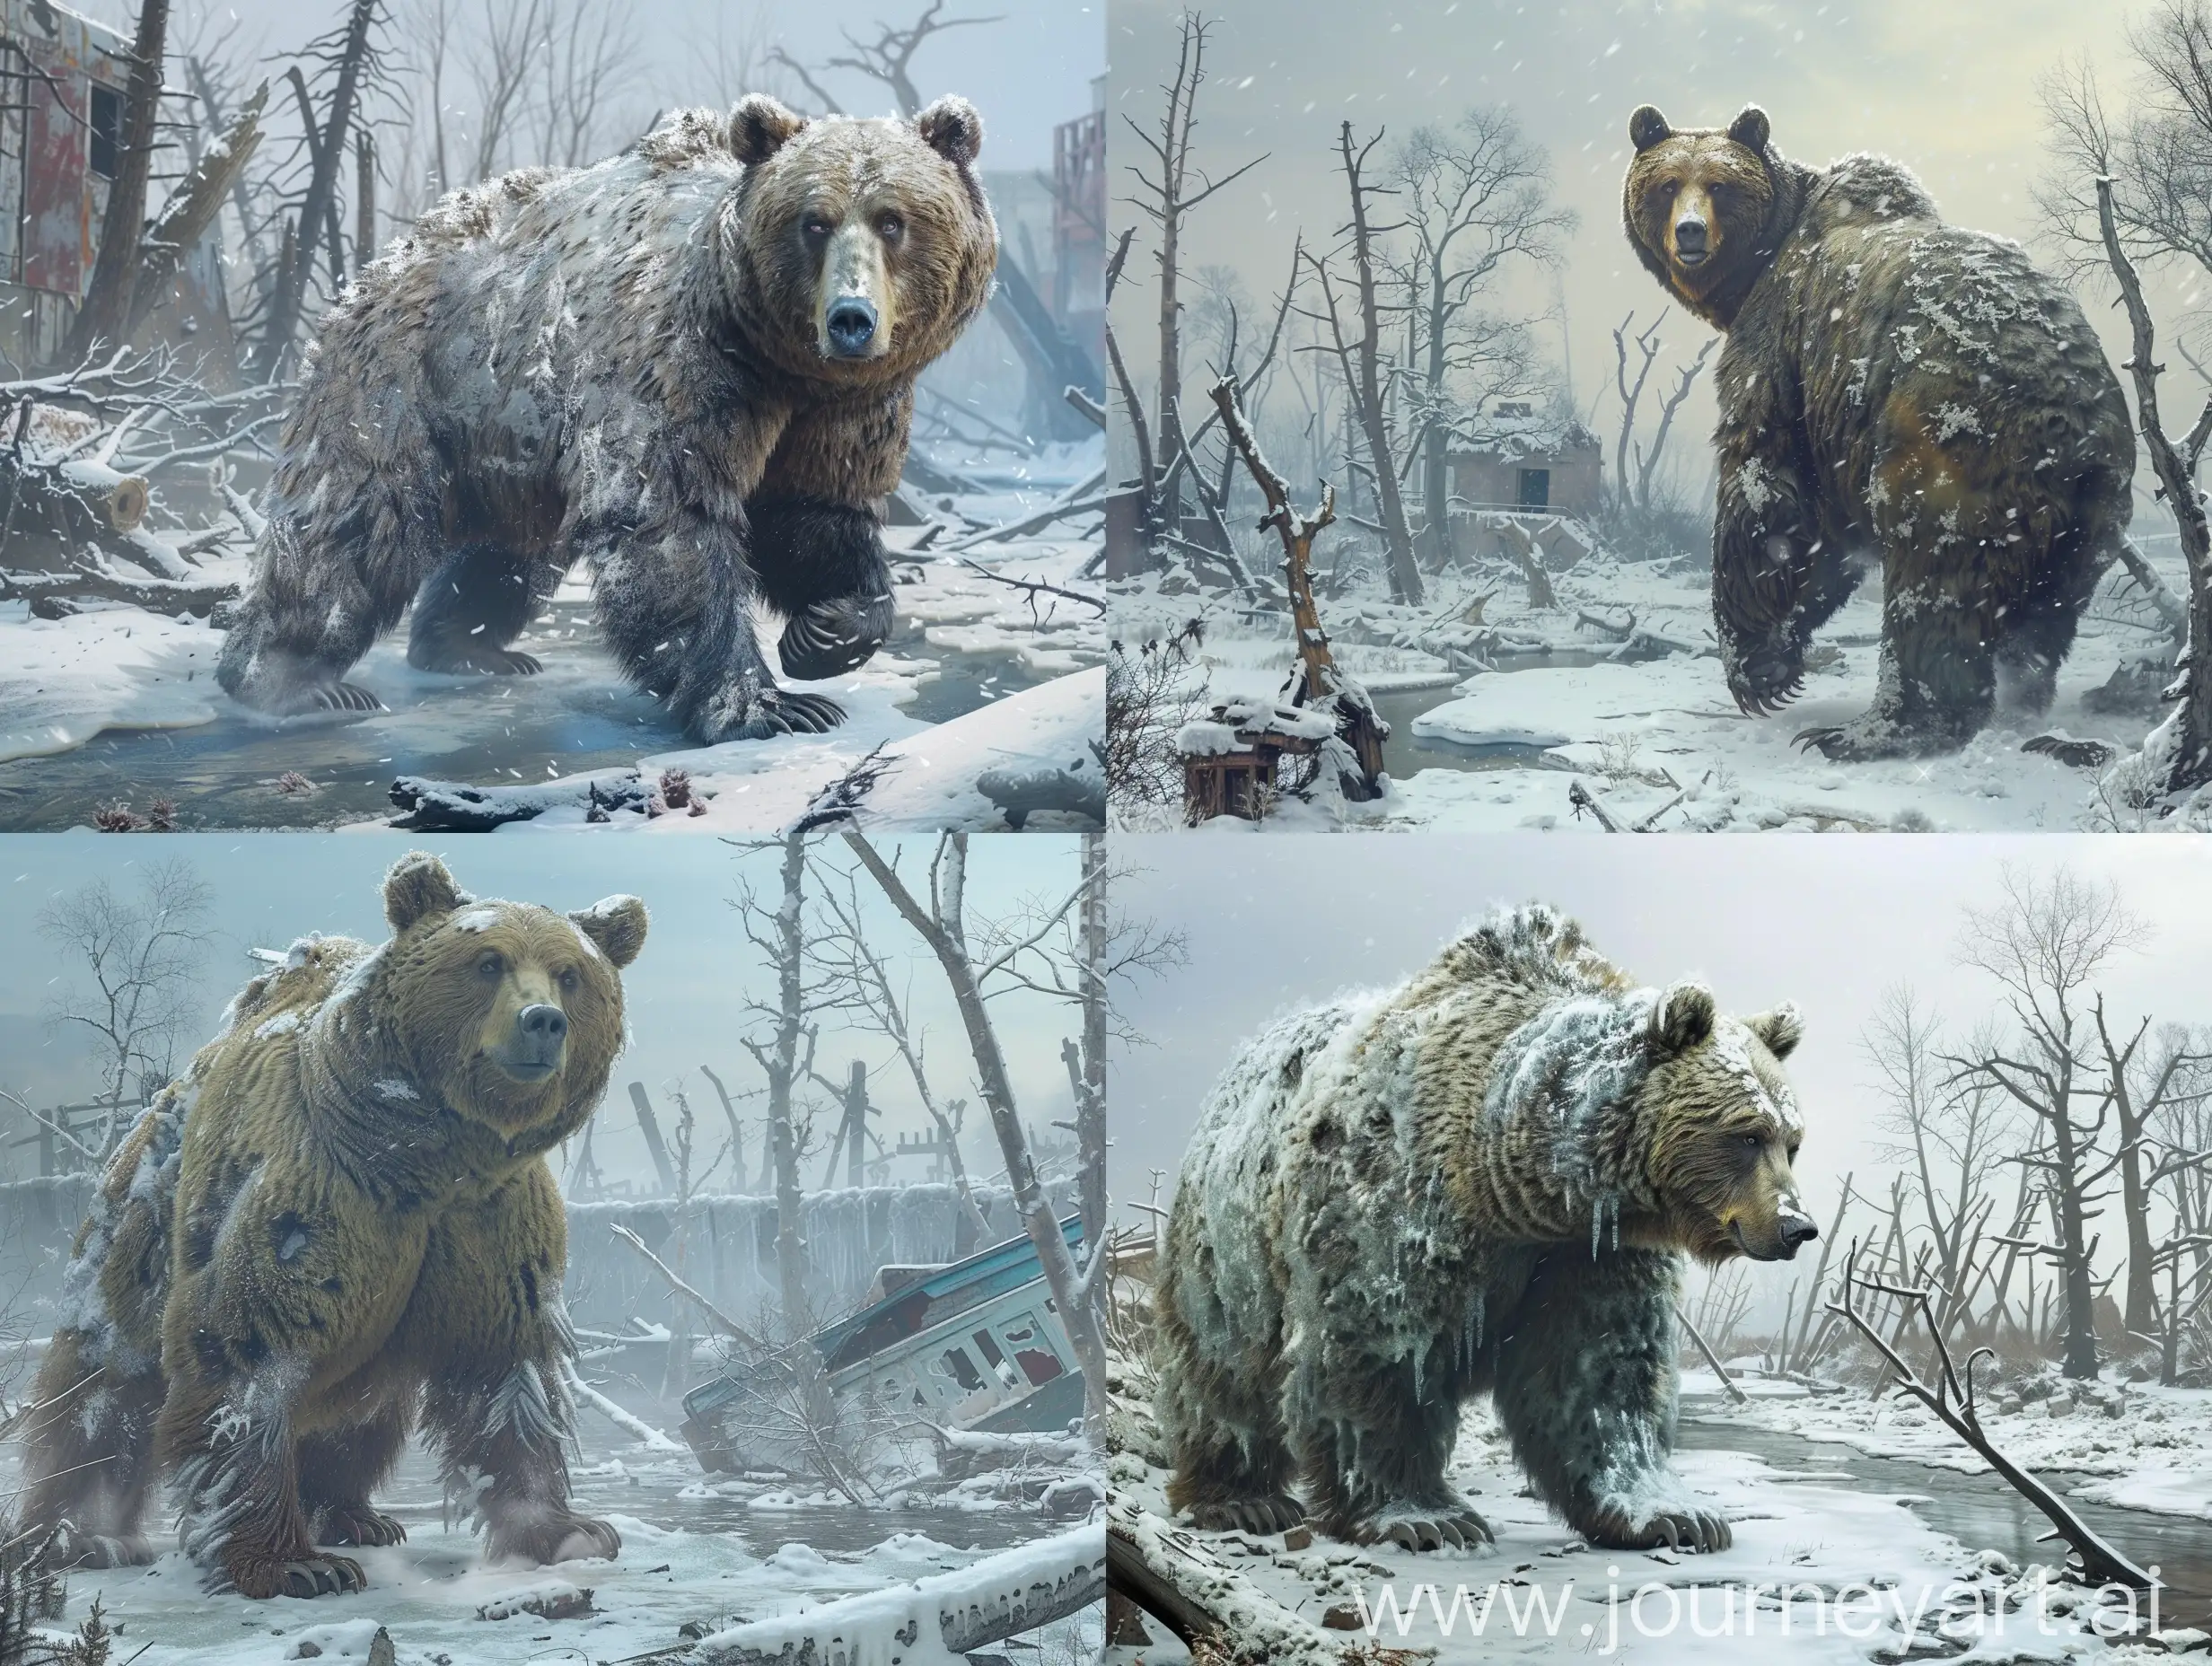 In a desolate, post-apocalyptic landscape, a massive grizzly bear emerges from its long hibernation, its fur thick and frost-covered. The bear, with a mix of curiosity and wariness in its eyes, stands on its hind legs amidst the remnants of a once-thriving forest now covered in a layer of snow and ash. The bear's awakening is juxtaposed against a backdrop of skeletal trees, their bare branches coated in a layer of frost, and remnants of human civilization partially buried in the snow.
The environment is a hauntingly beautiful yet desolate winter landscape, featuring skeletal trees, frozen rivers, and abandoned buildings. The sky is overcast, casting a muted light over the bleak scene, and remnants of nuclear fallout are visible in the snow, creating an unsettling atmosphere. Style: The image is depicted in a realistic and detailed style, capturing the raw emotion and vulnerability of nature in the aftermath of a catastrophic event. The color palette is dominated by cold and muted tones, with icy blues, ashy grays, and hints of faded greens, emphasizing the harshness of the nuclear winter. The atmosphere is somber and reflective, conveying a sense of both resilience and sorrow as nature reclaims the remnants of a world forever changed.